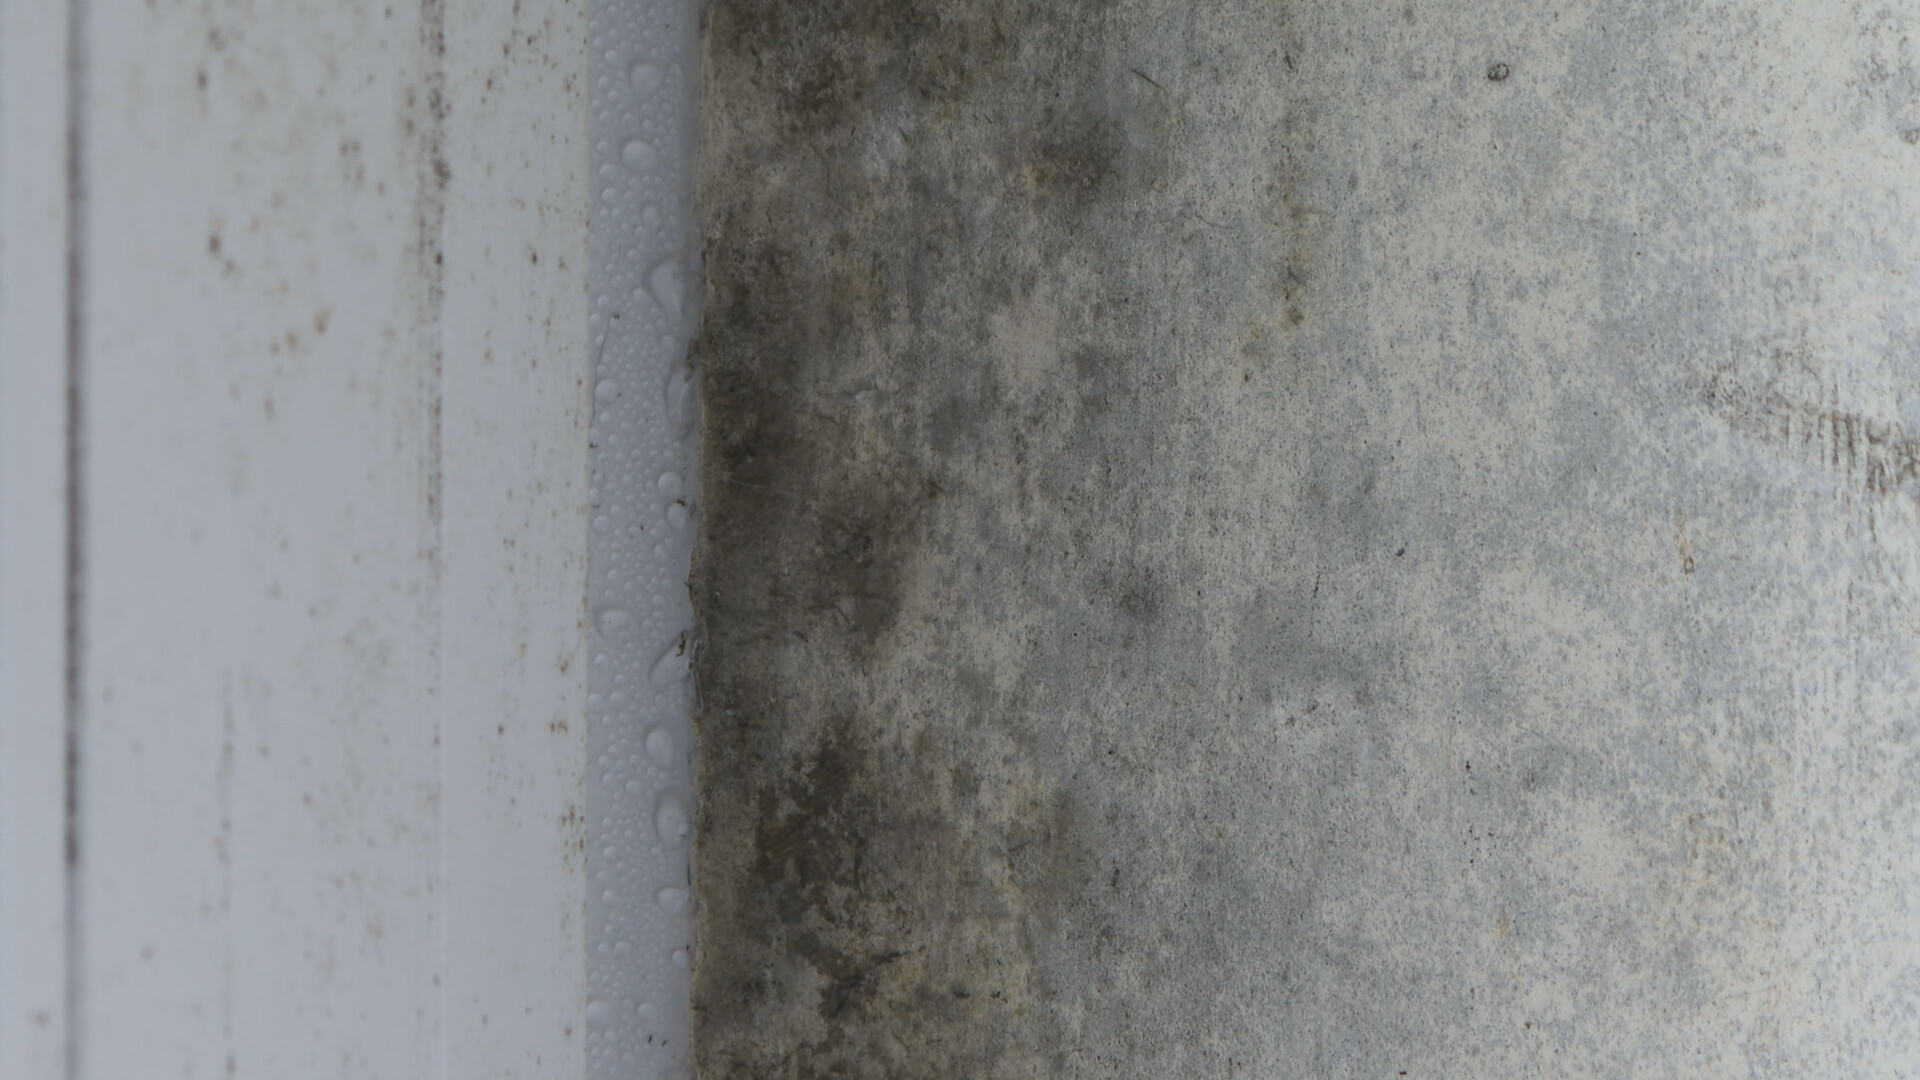 Areas of mould in the council property